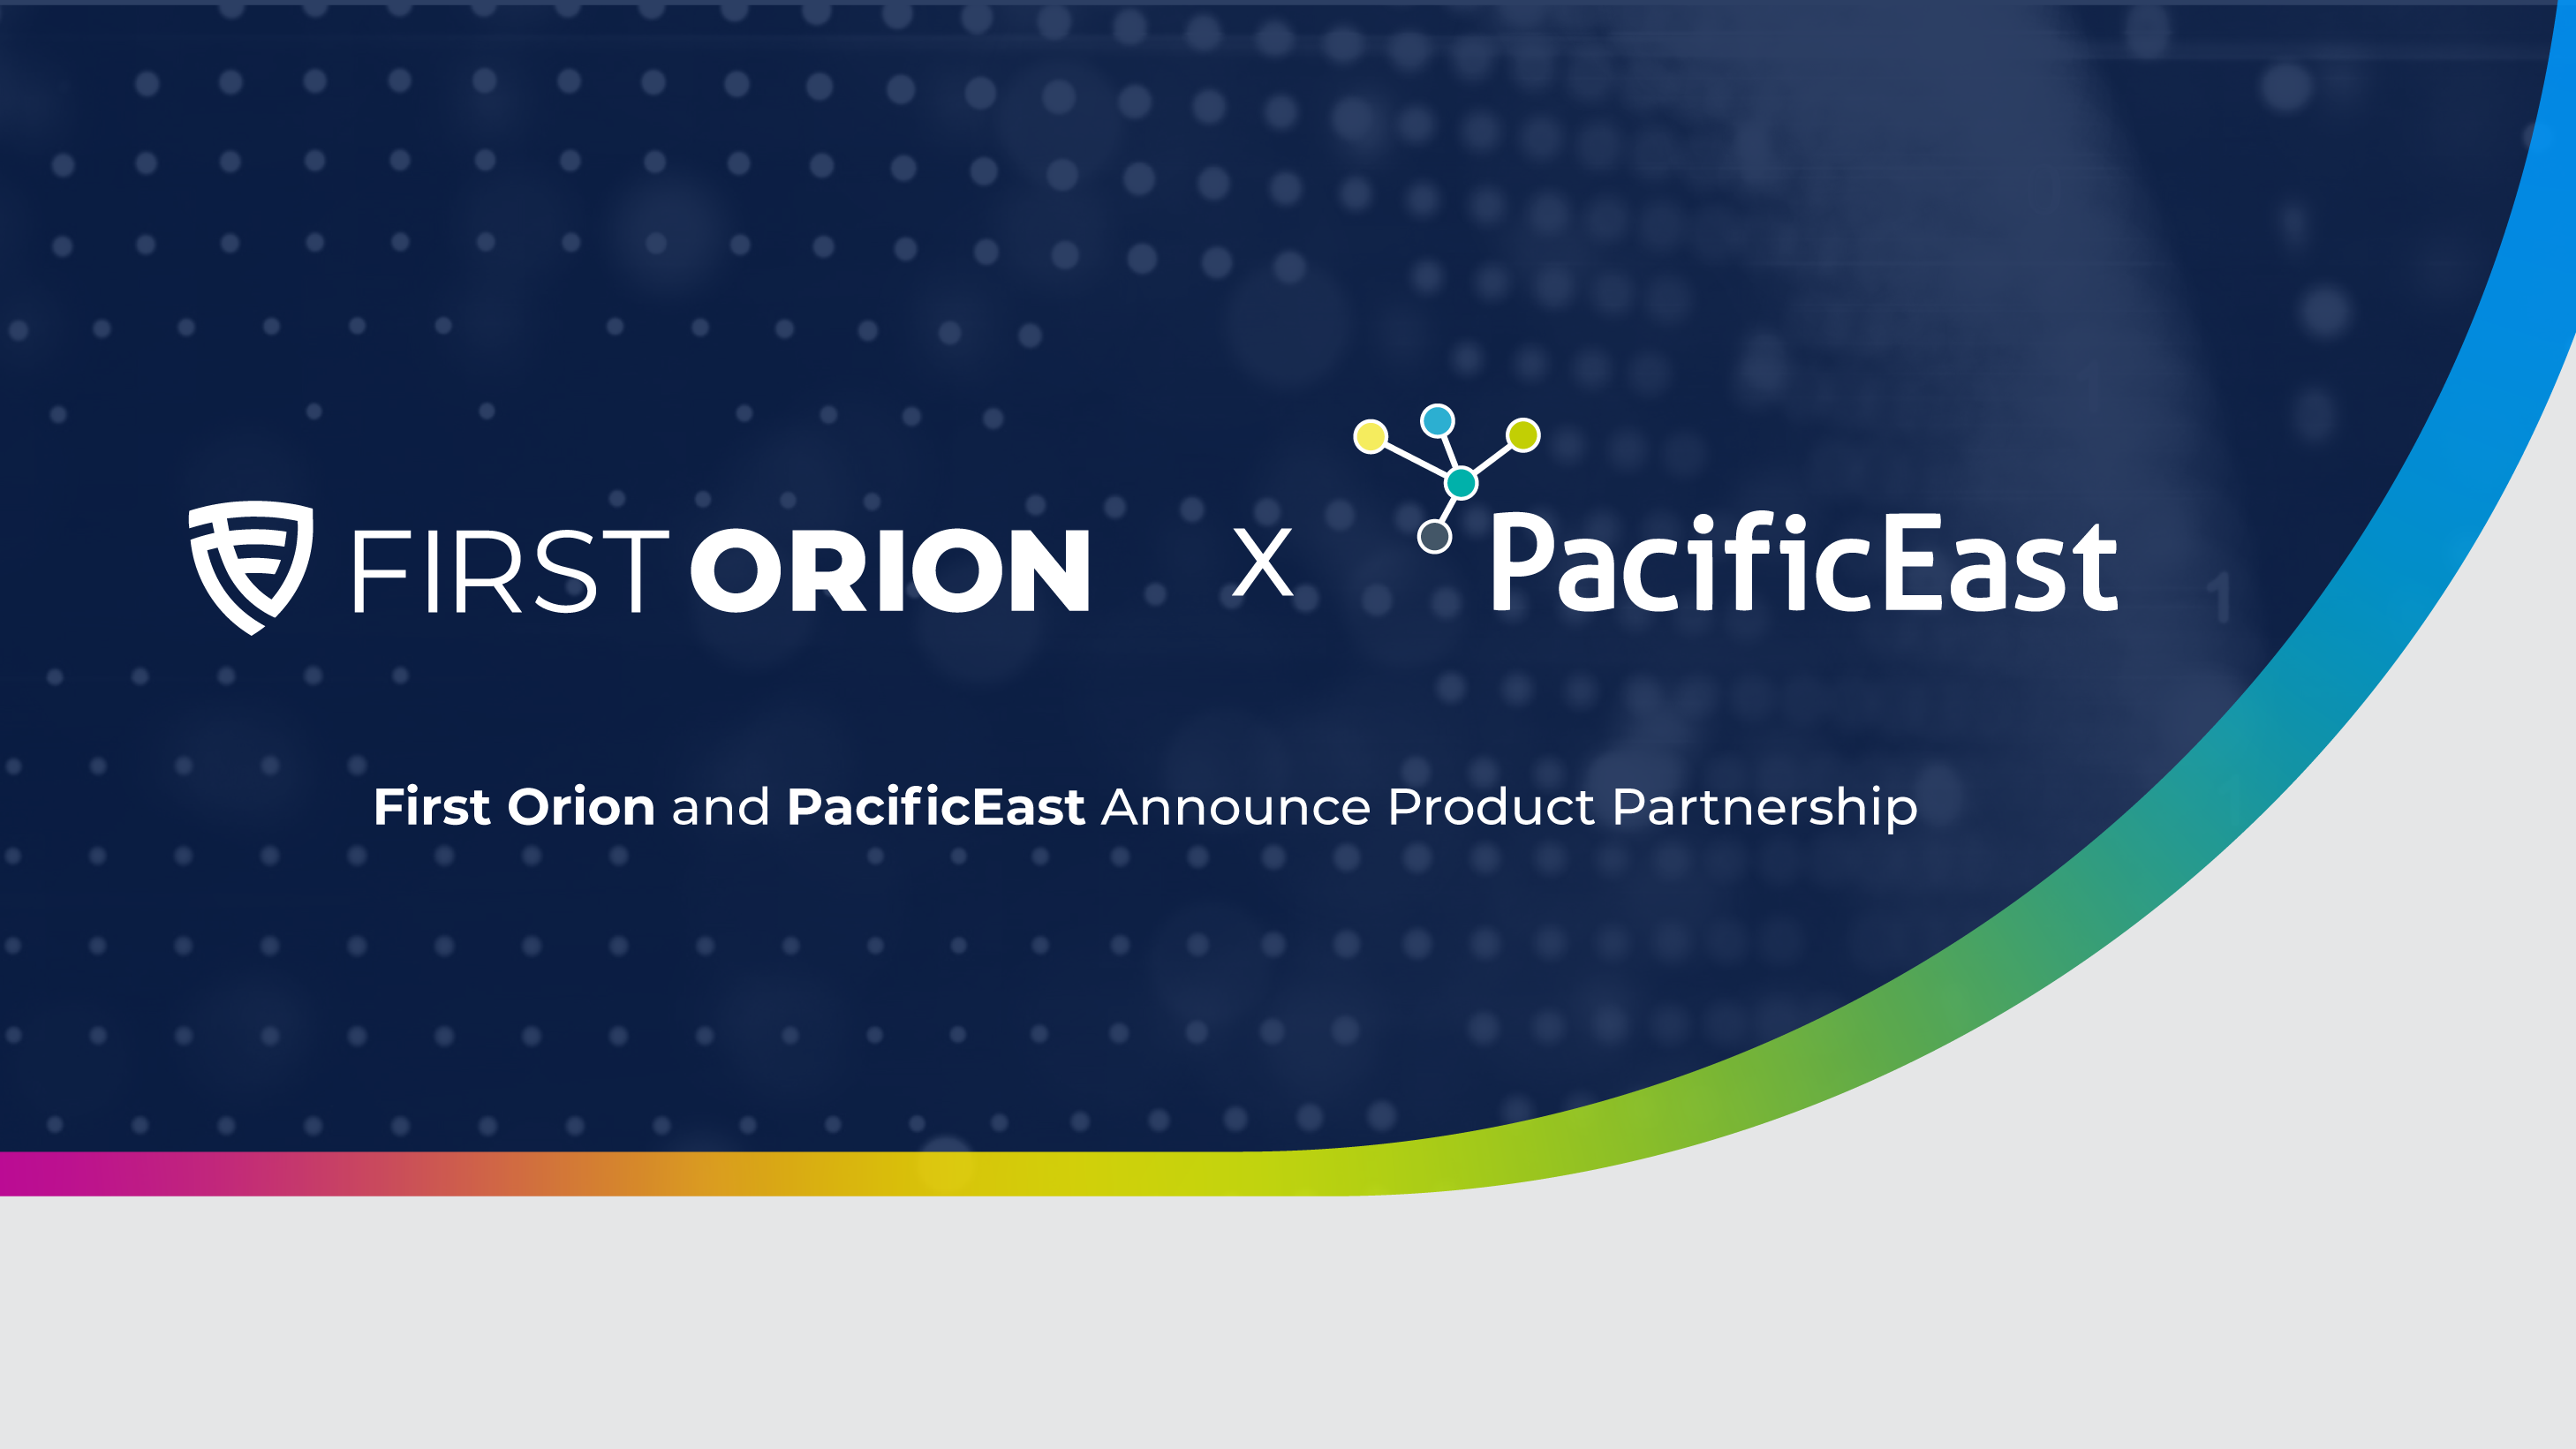 First Orion and PacificEast Partner to Provide Branded Communication to Enterprises